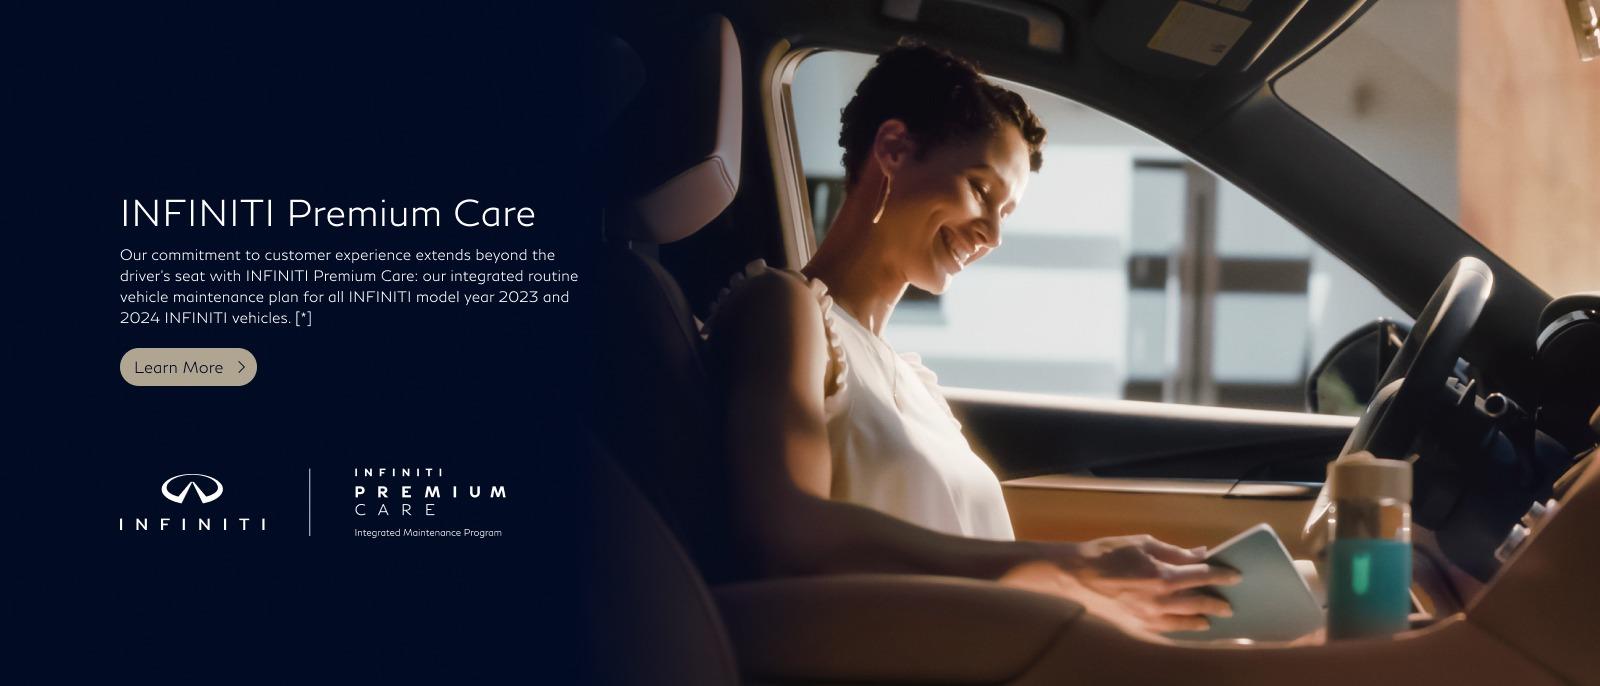 INFINITI Premium Care Our commitment to customer experience extends beyond the driver's seat with INFINITI Premium Care : our integrated routine vehicle maintenance plan for all INFINITI model year 2023 and 2024 INFINITI vehicles. [*]